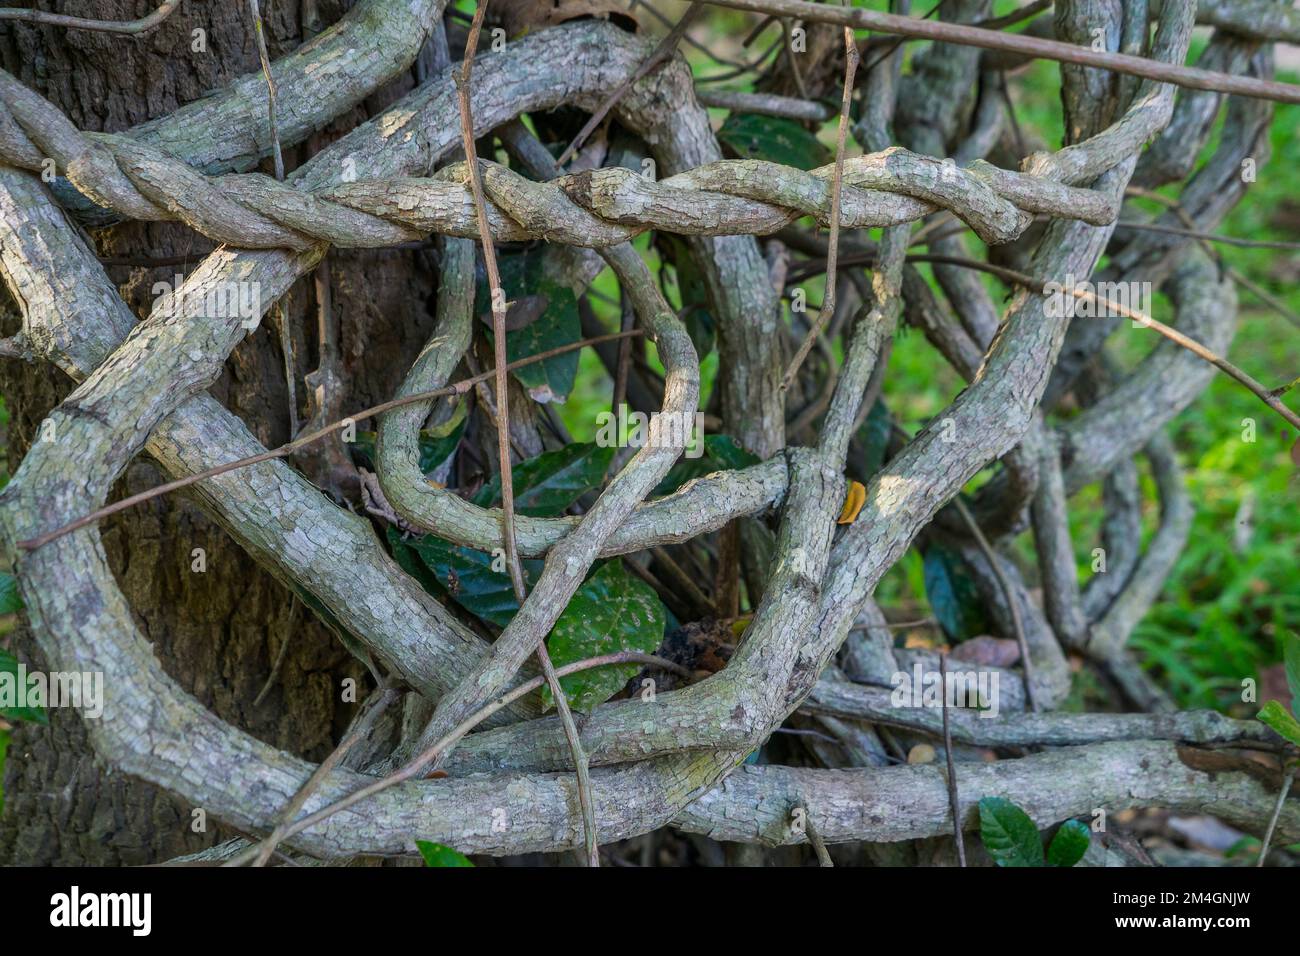 Liana or twisted jungle vines knotted around each other under green trees in a rainforest garden, southeast Asia, no people. Stock Photo